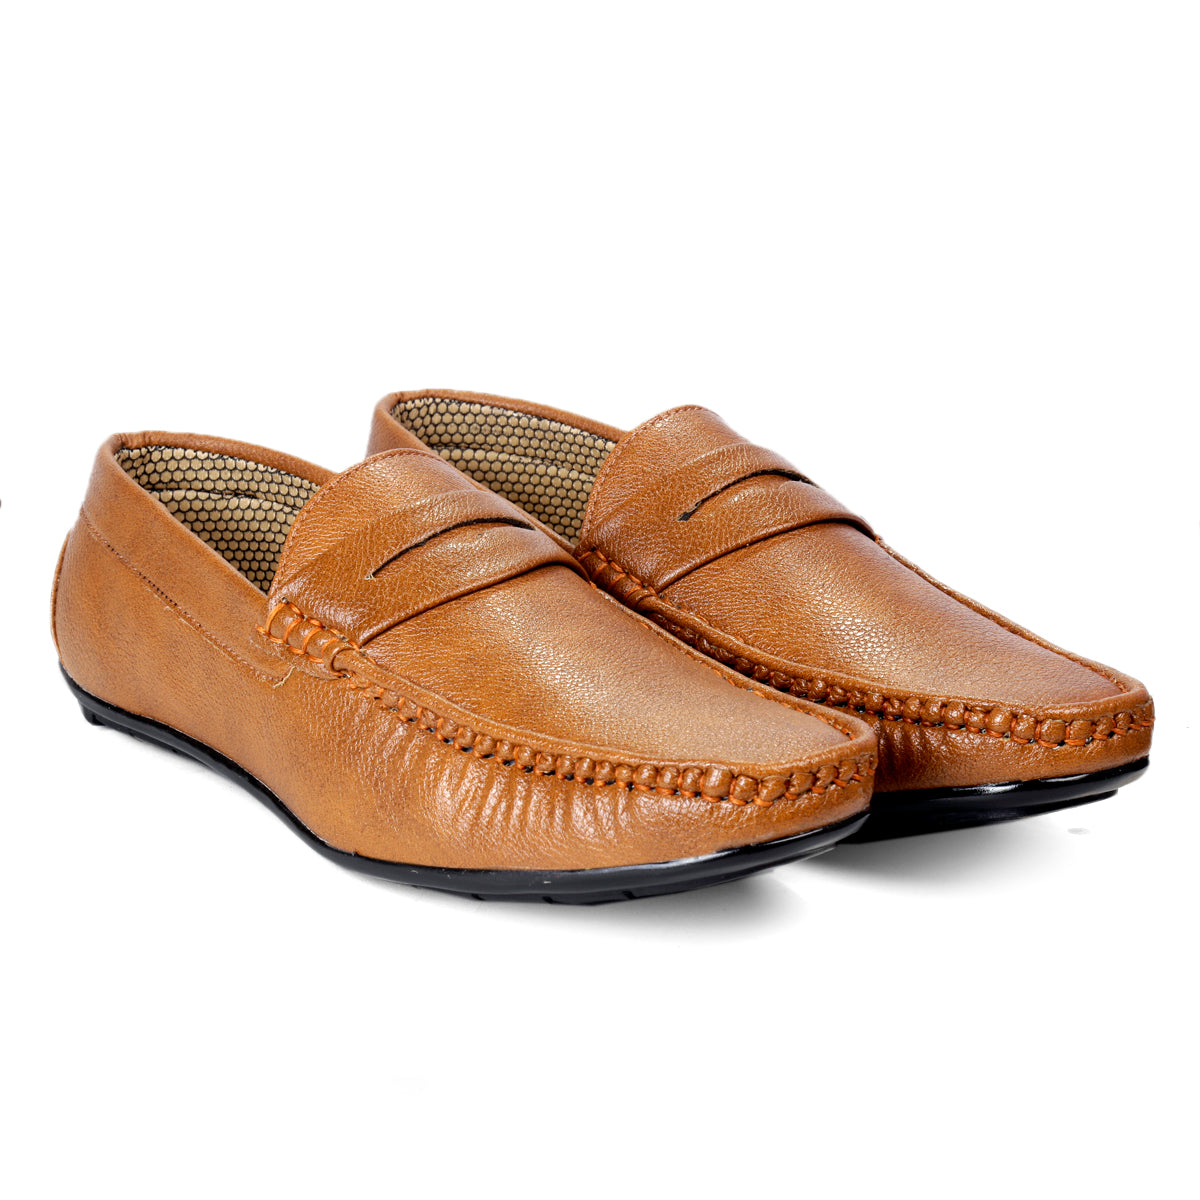 BXXY Casual Stylish And Fashionable Loafers For Men